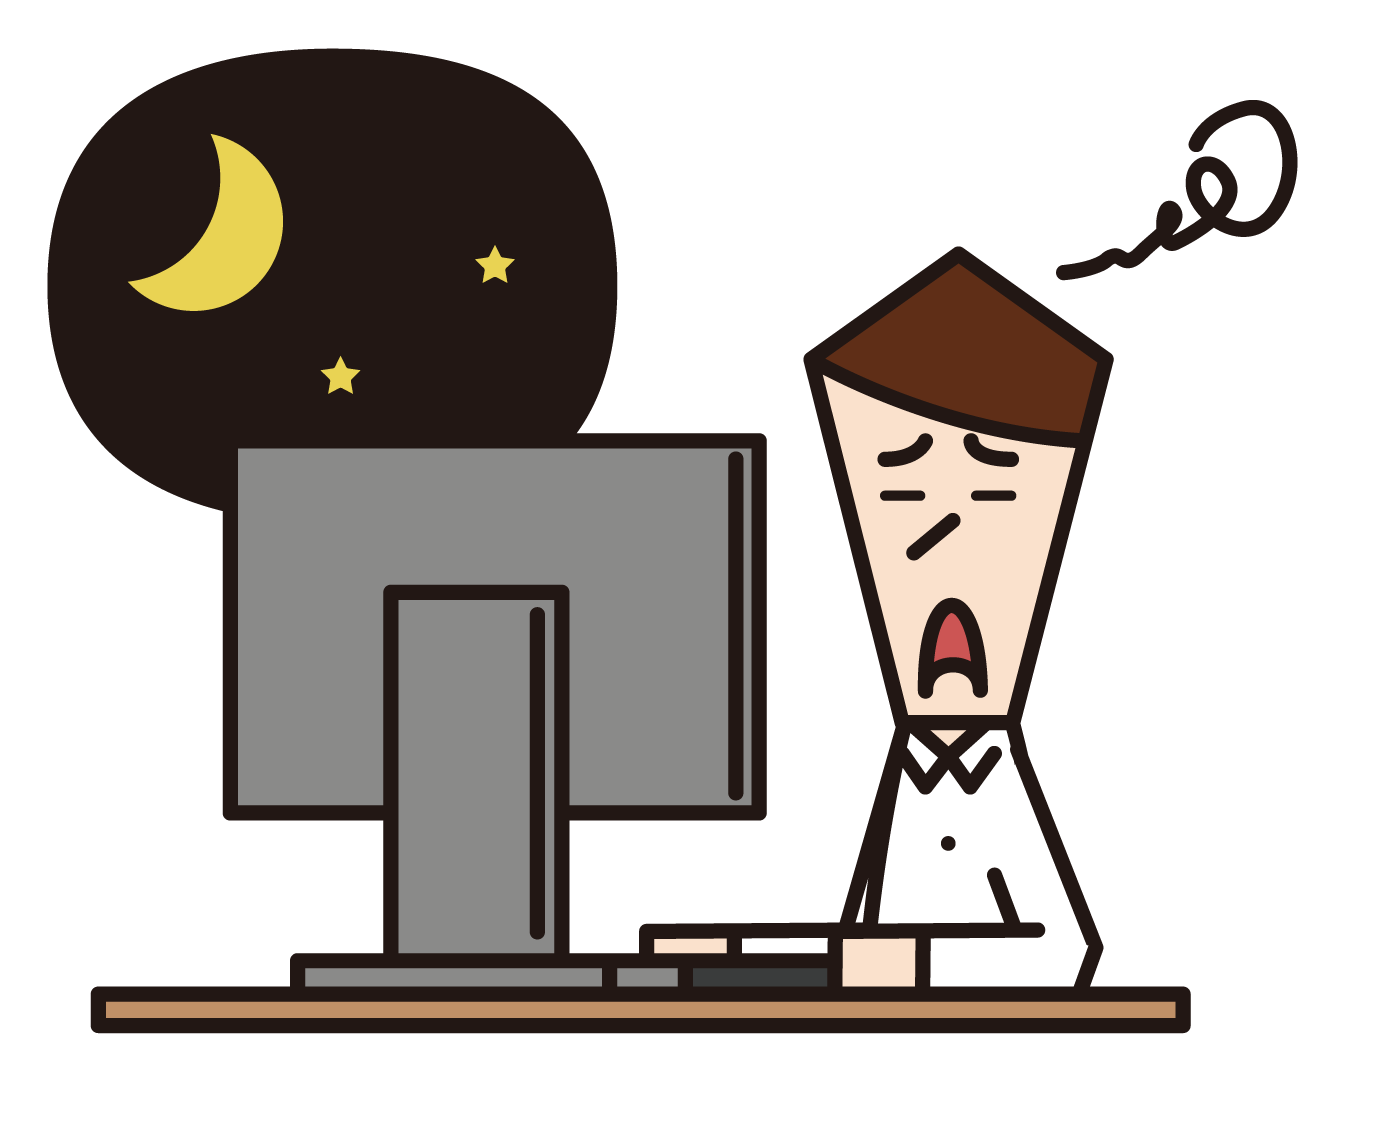 Illustration of a man who works late at night